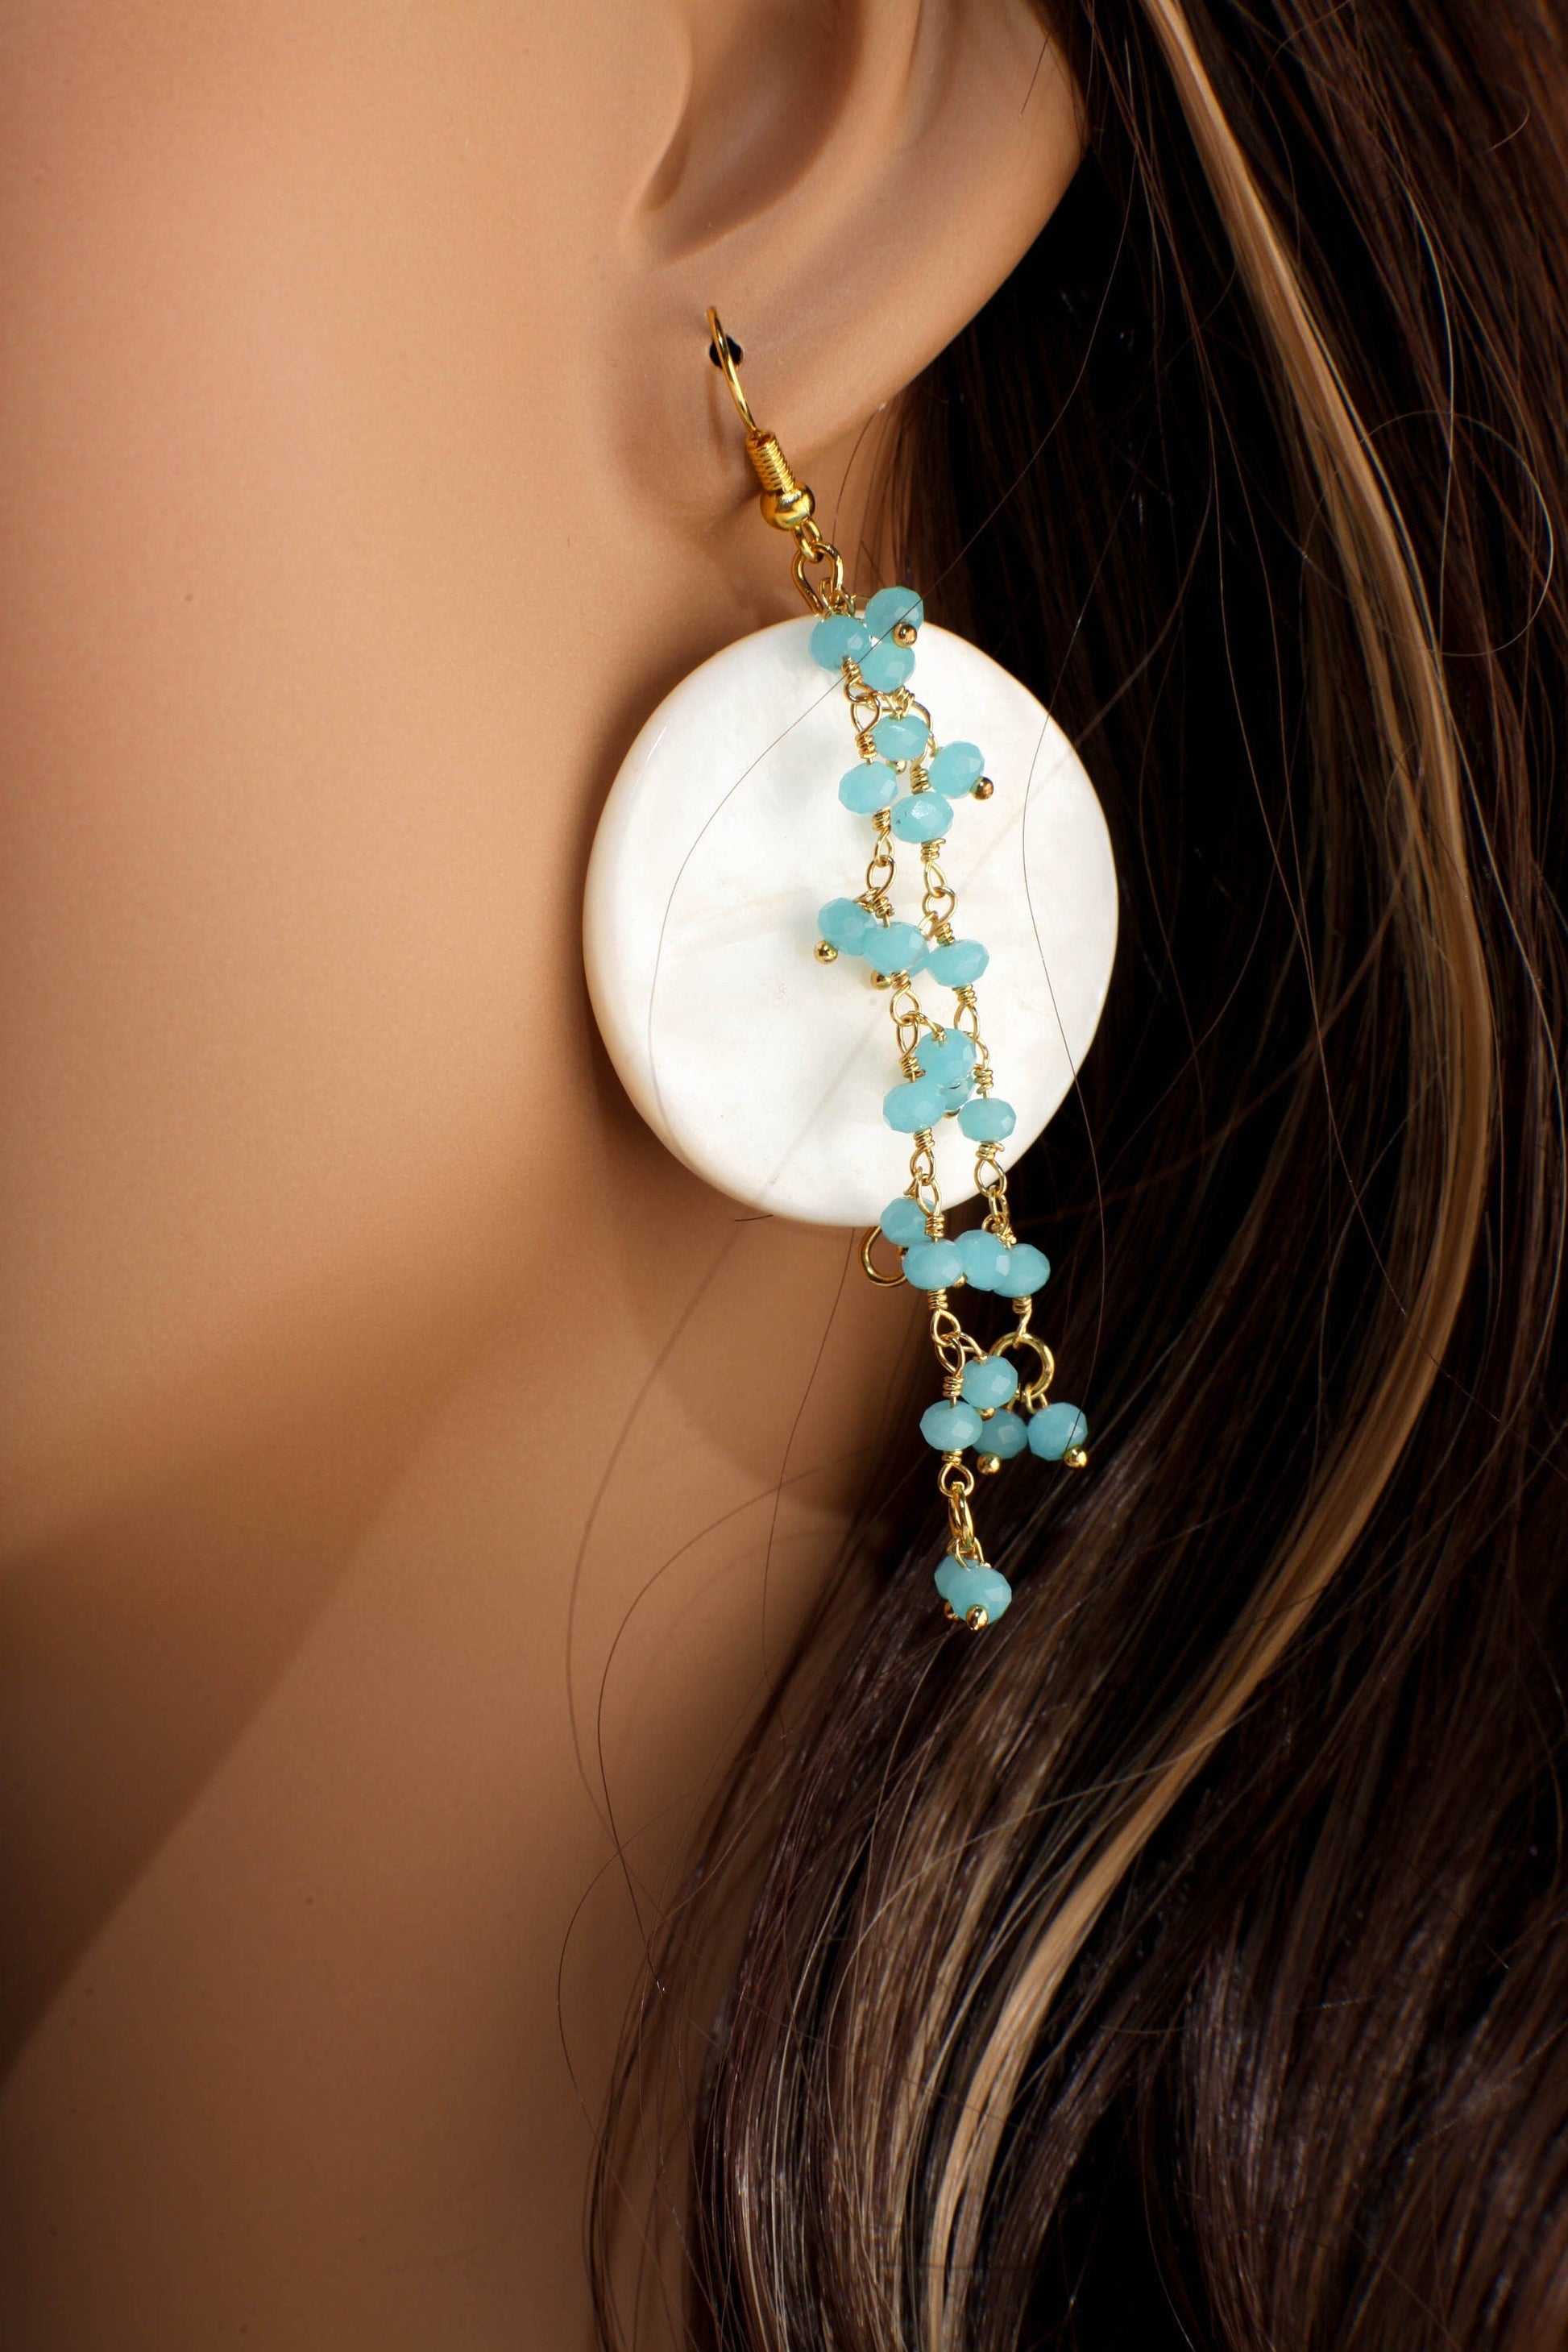 Mother of Pearl Shell 35mm Natural White with Dangling Blue Aqua Chalcedony crystal Cluster Gold Earwire Earrings, Beach, Boho Gift for her